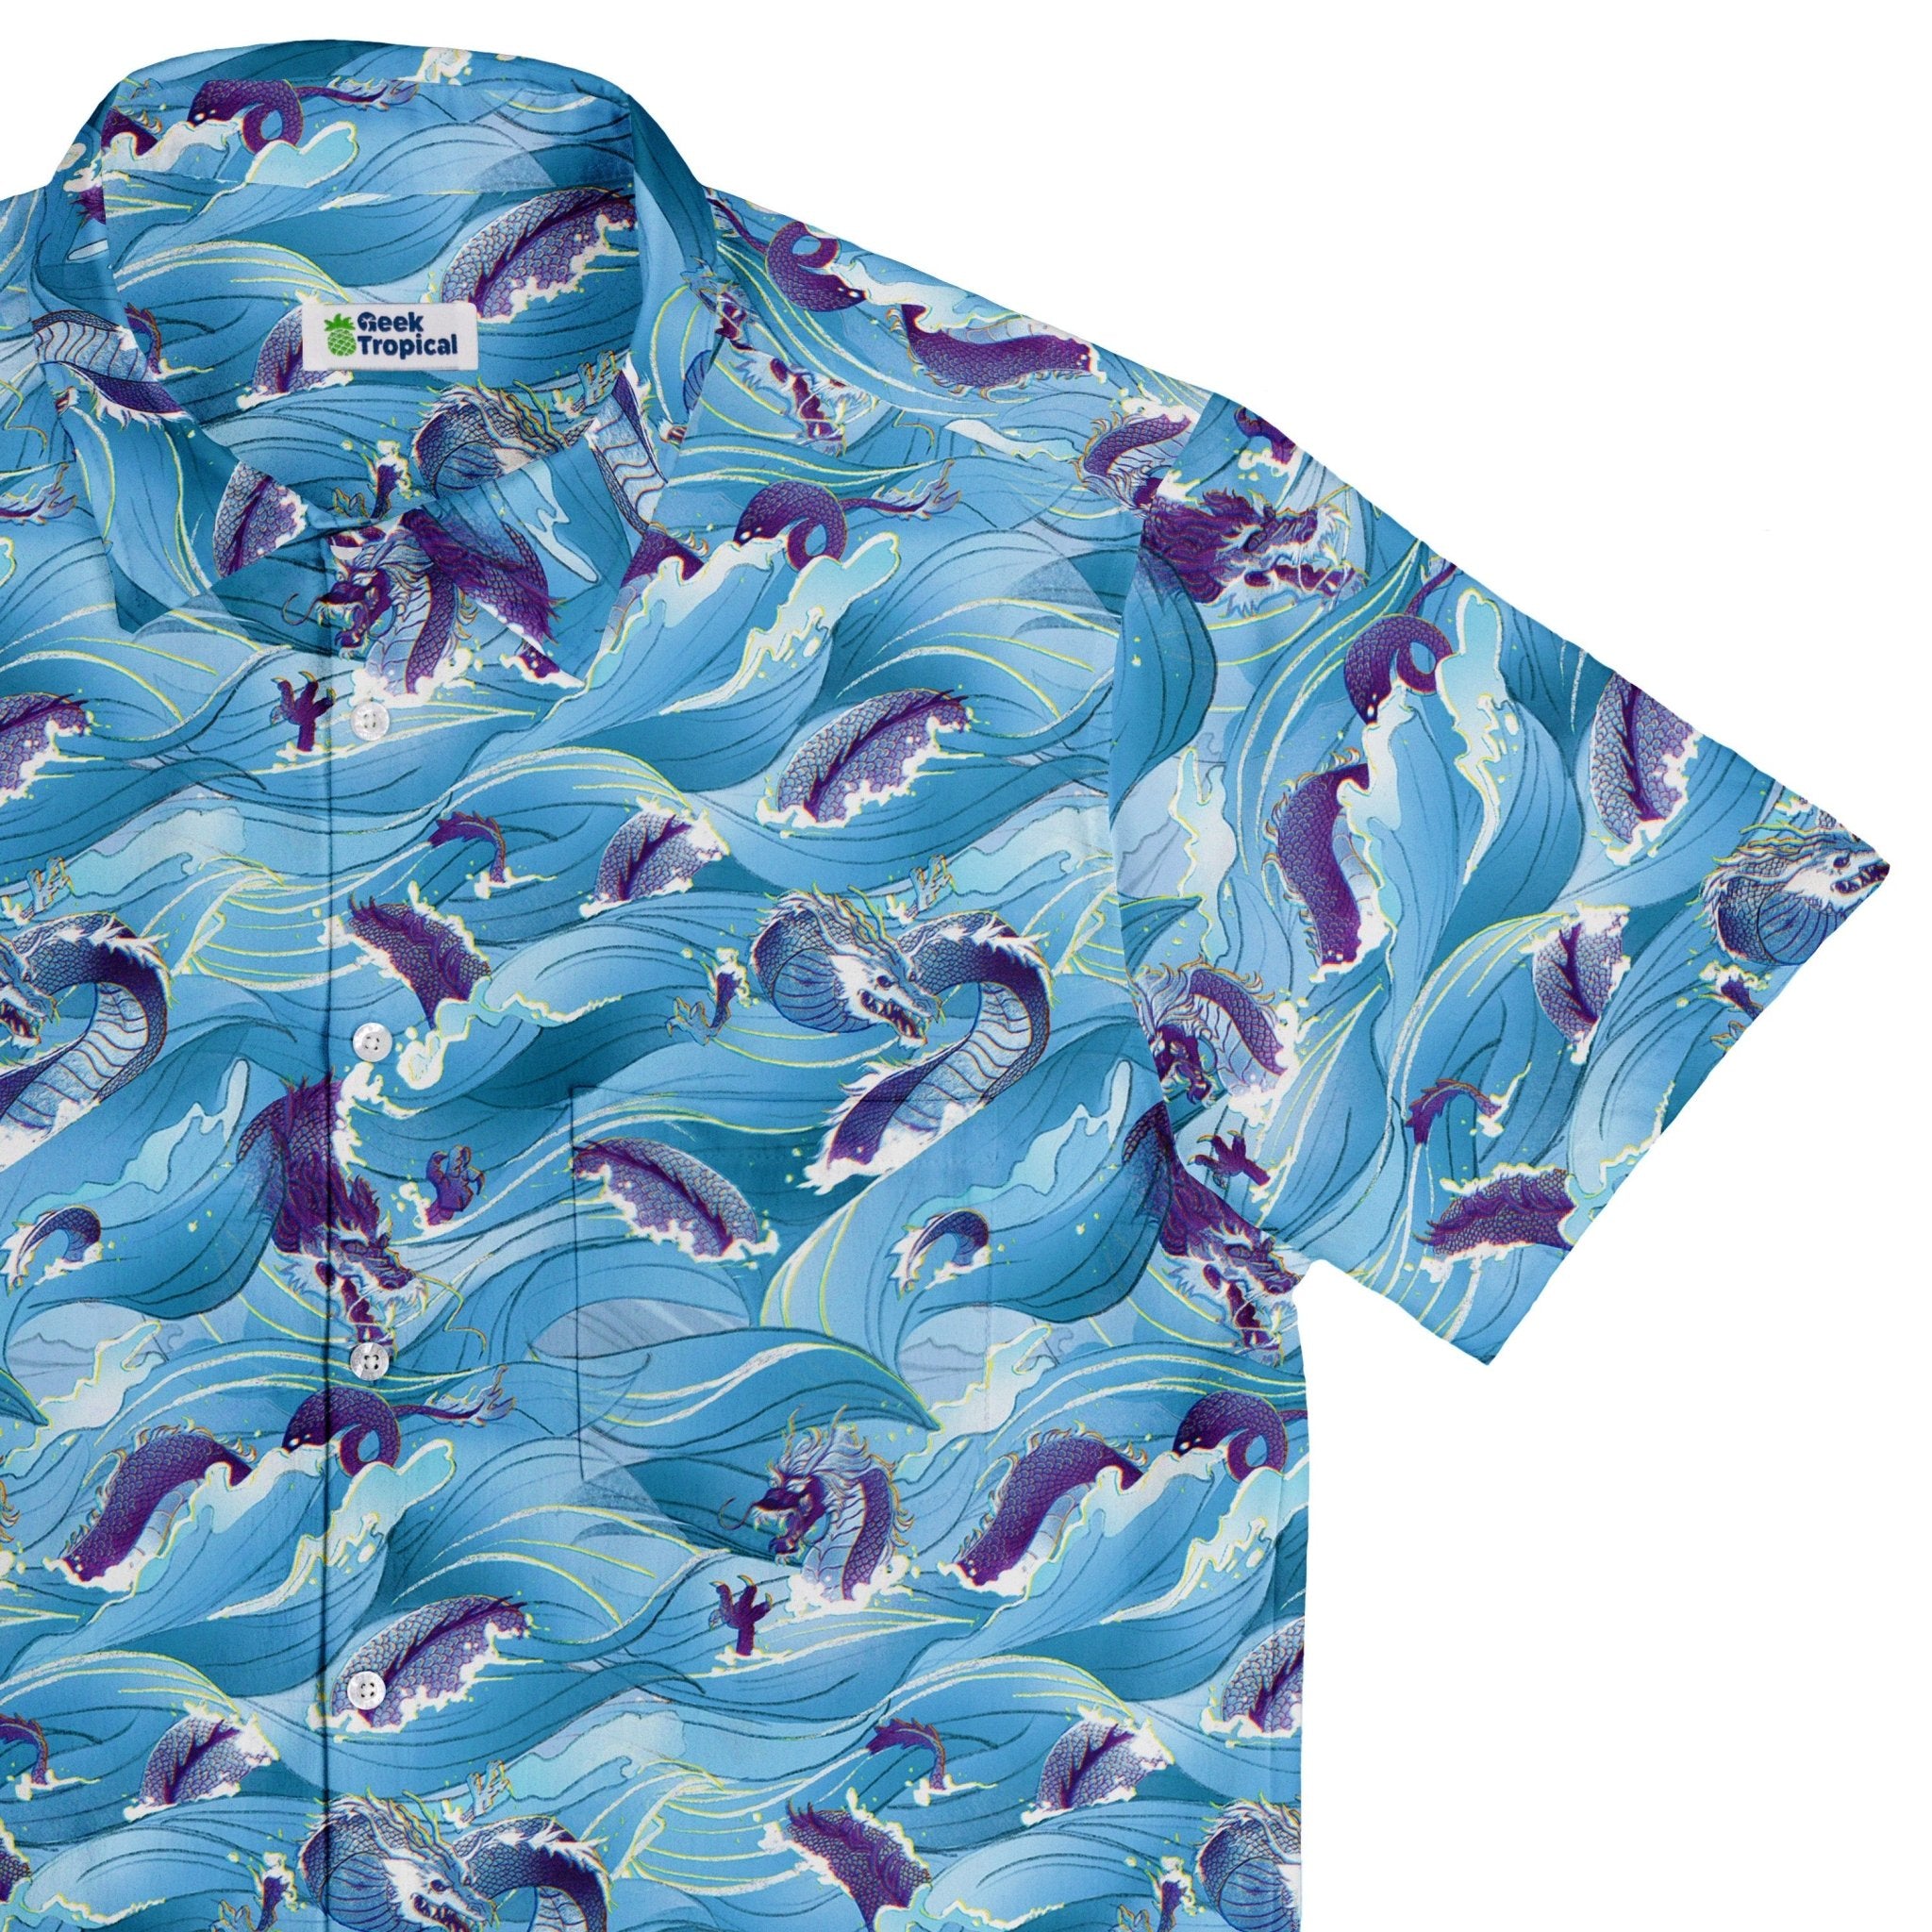 Serpent of the Sea Blue Anime Button Up Shirt - adult sizing - Anime - Design by Claire Murphy